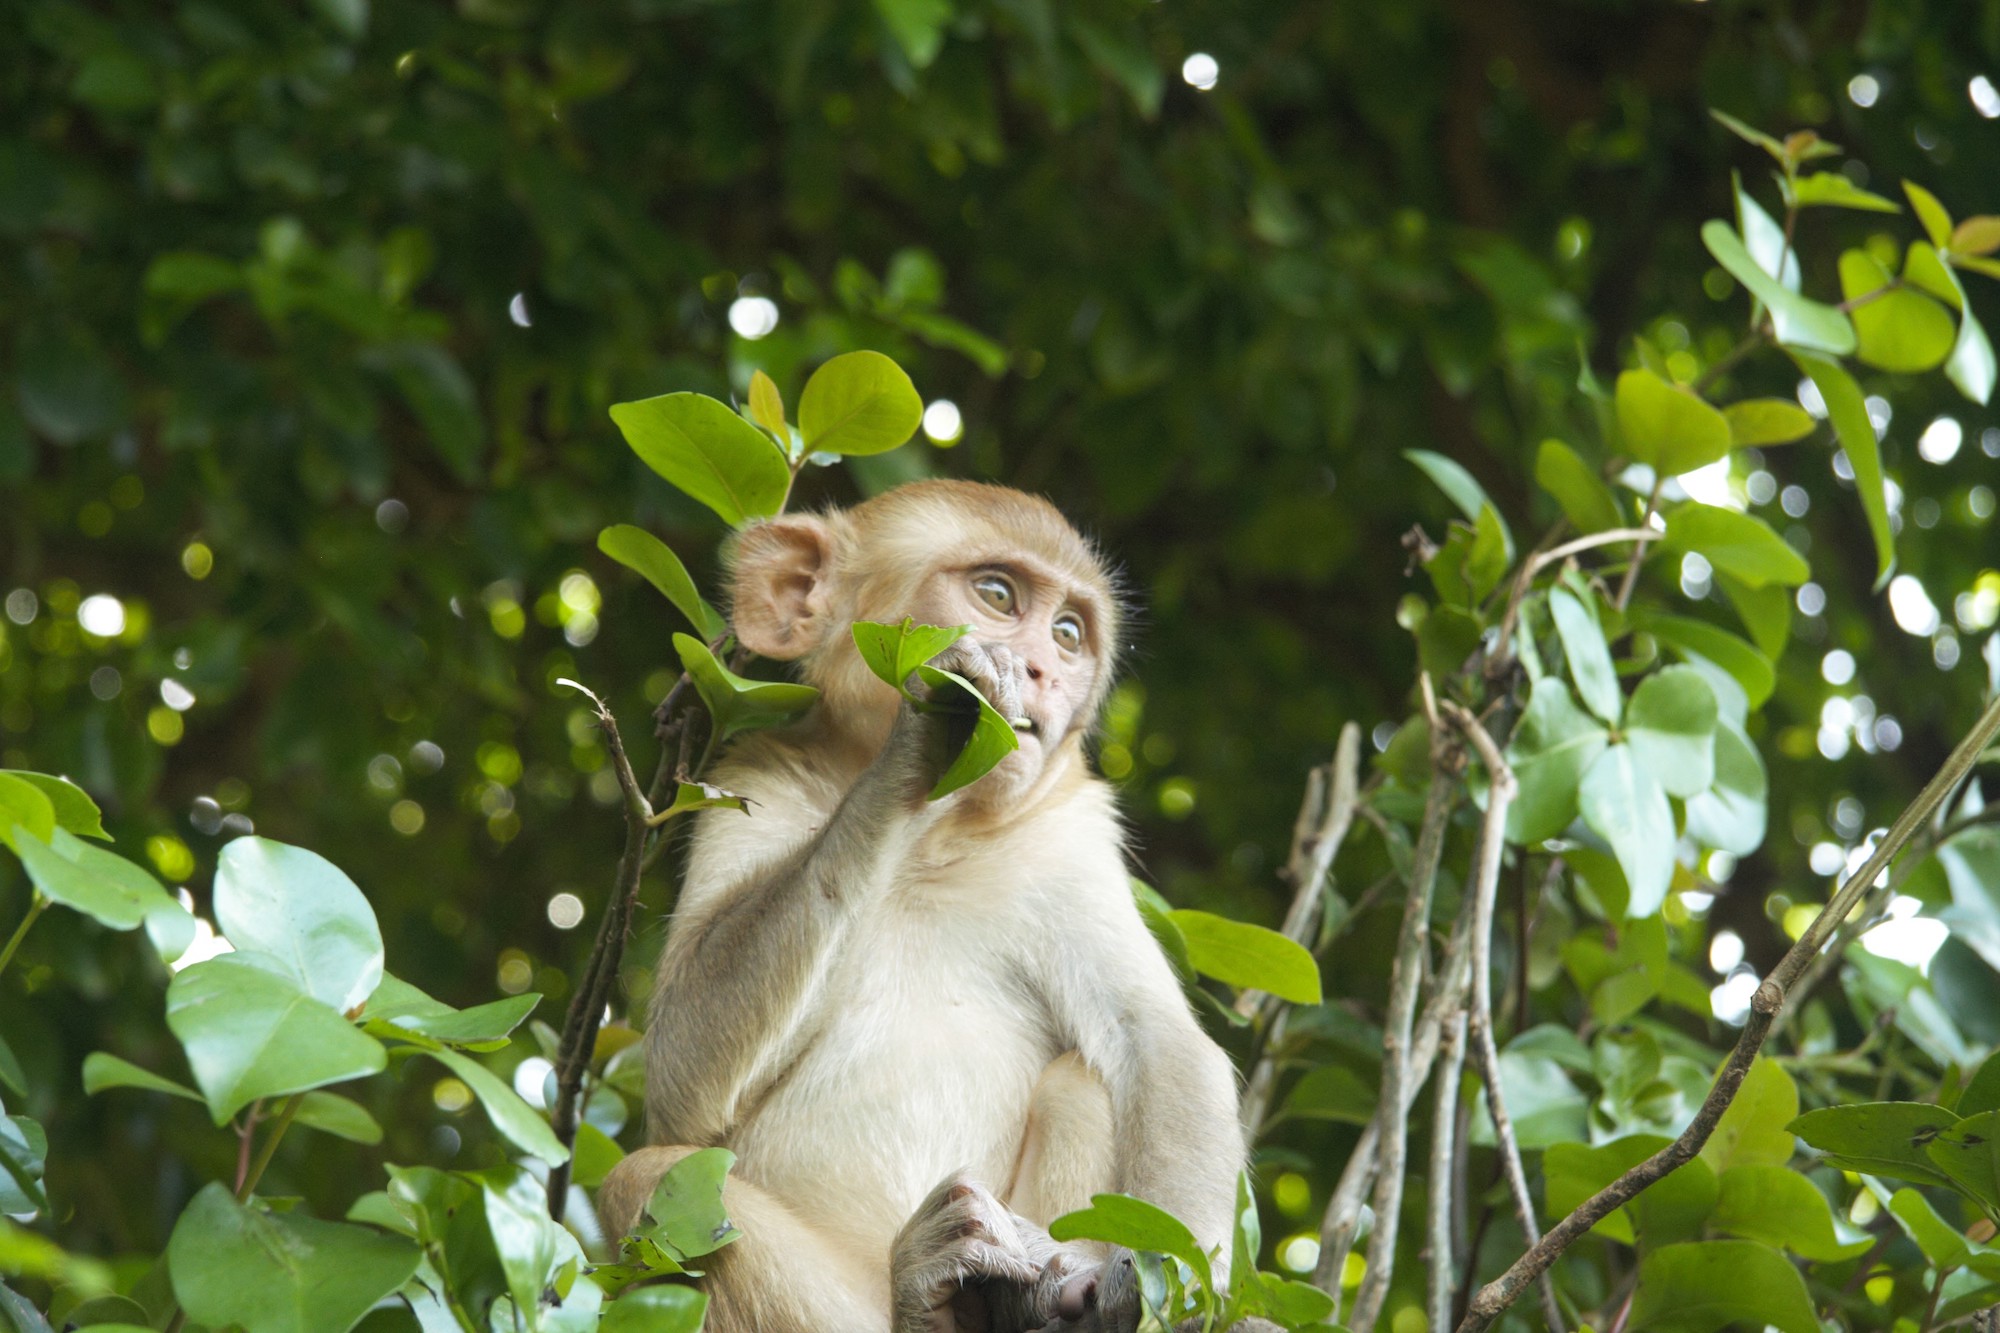 A small tannish colored monkey on a tree, eating a leaf, surrounded by leaves with branches. Blurred trees are in the background.